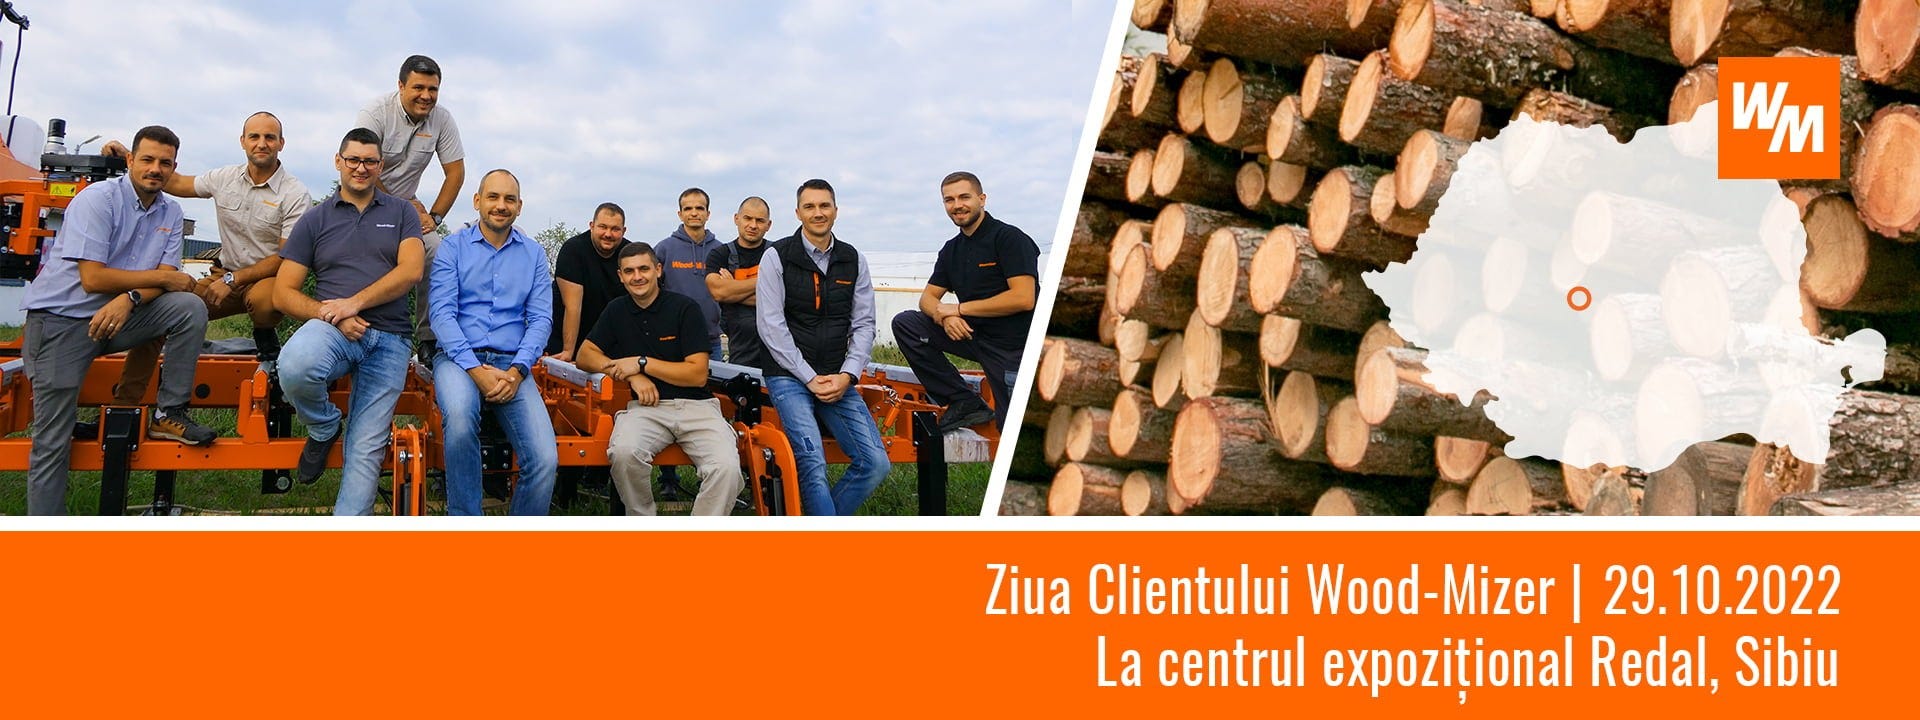 Welcome to the Wood-Mizer Customer Day in Romania